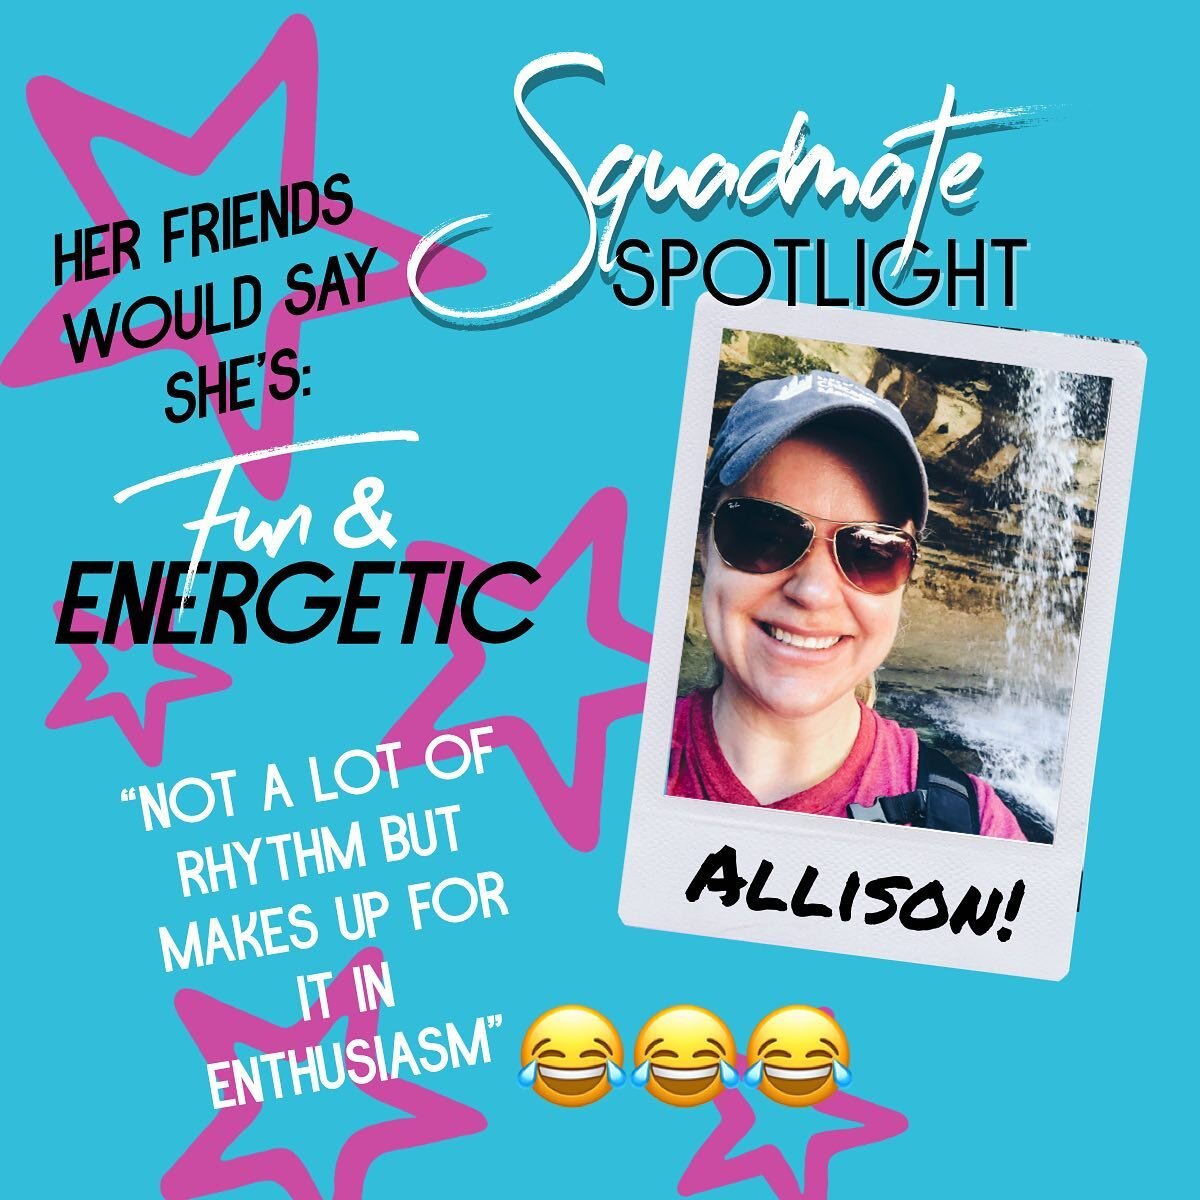 It&rsquo;s #SquadmateSpotlight time! This week we get to show love to our super fun pal Allison! She&rsquo;s always a blast to dance with and is not afraid to drop it LOW when asked ( or anytime, really 😉) Shout out to Sophia a.k.a. Captain Linergiz